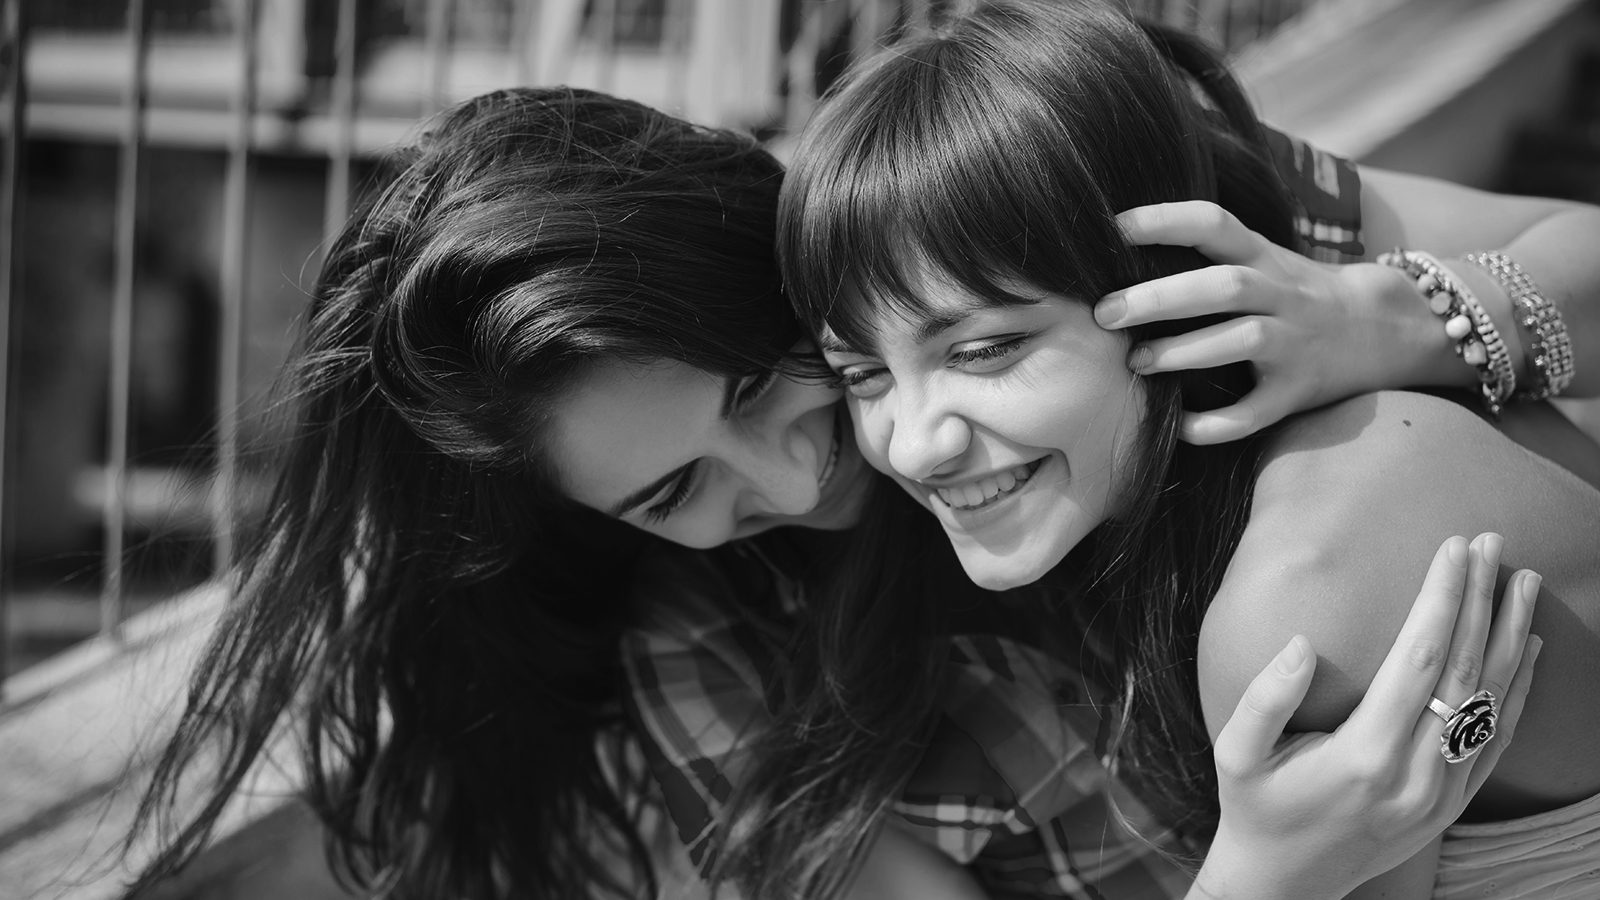 16 Reasons That Sisters Make the Best Relatives